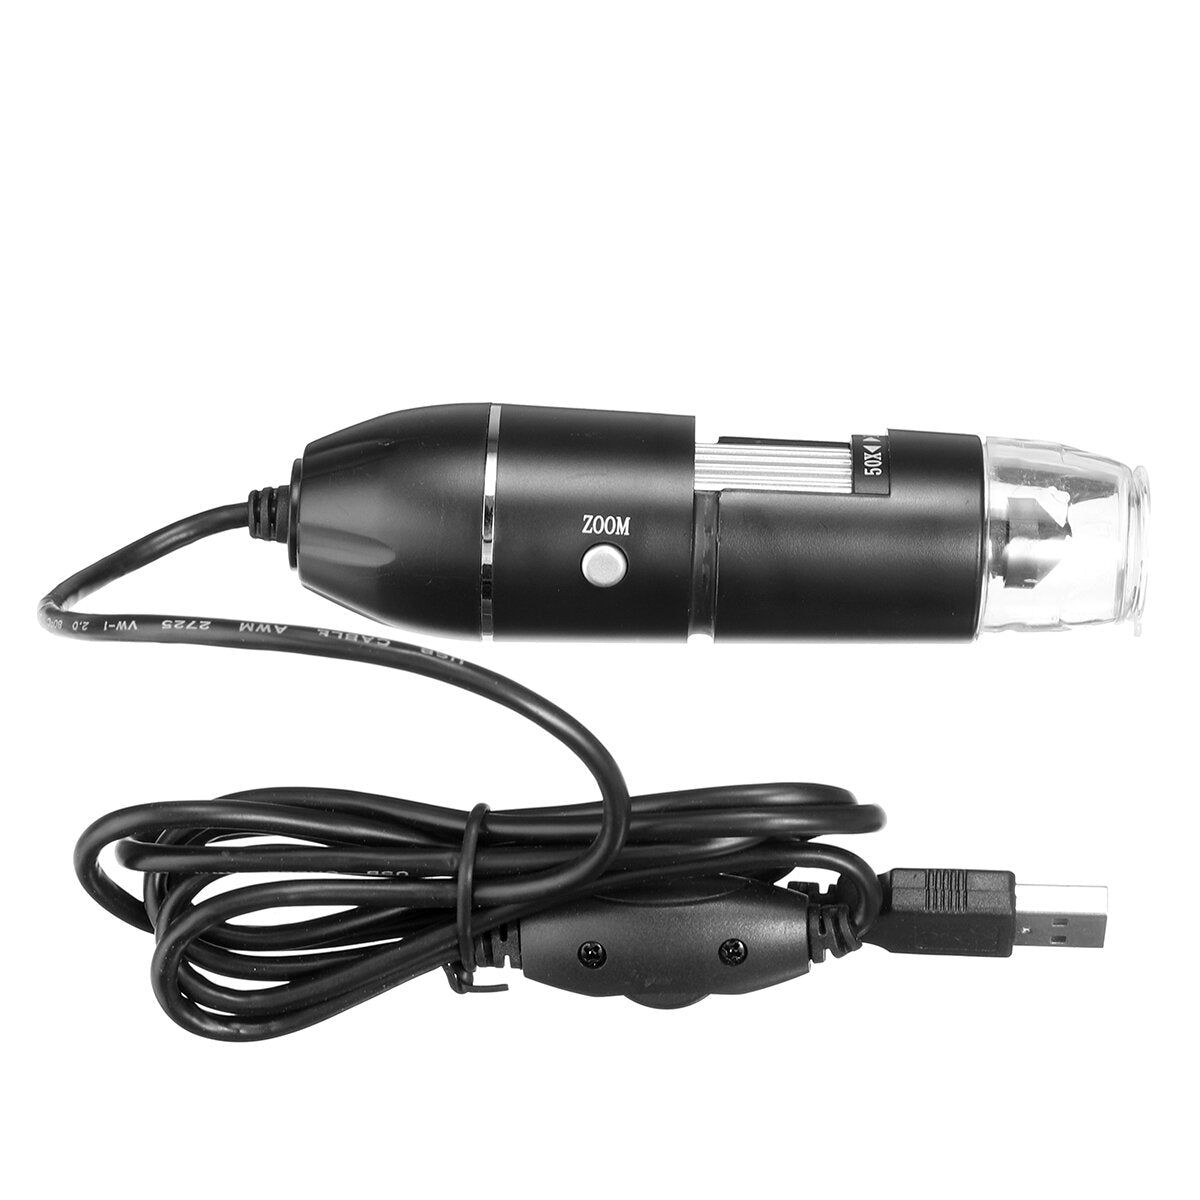 USB 3 in 1 Digital Microscope Endoscope HD 1080P Magnifier 1600X 8LEDCamera with Stand